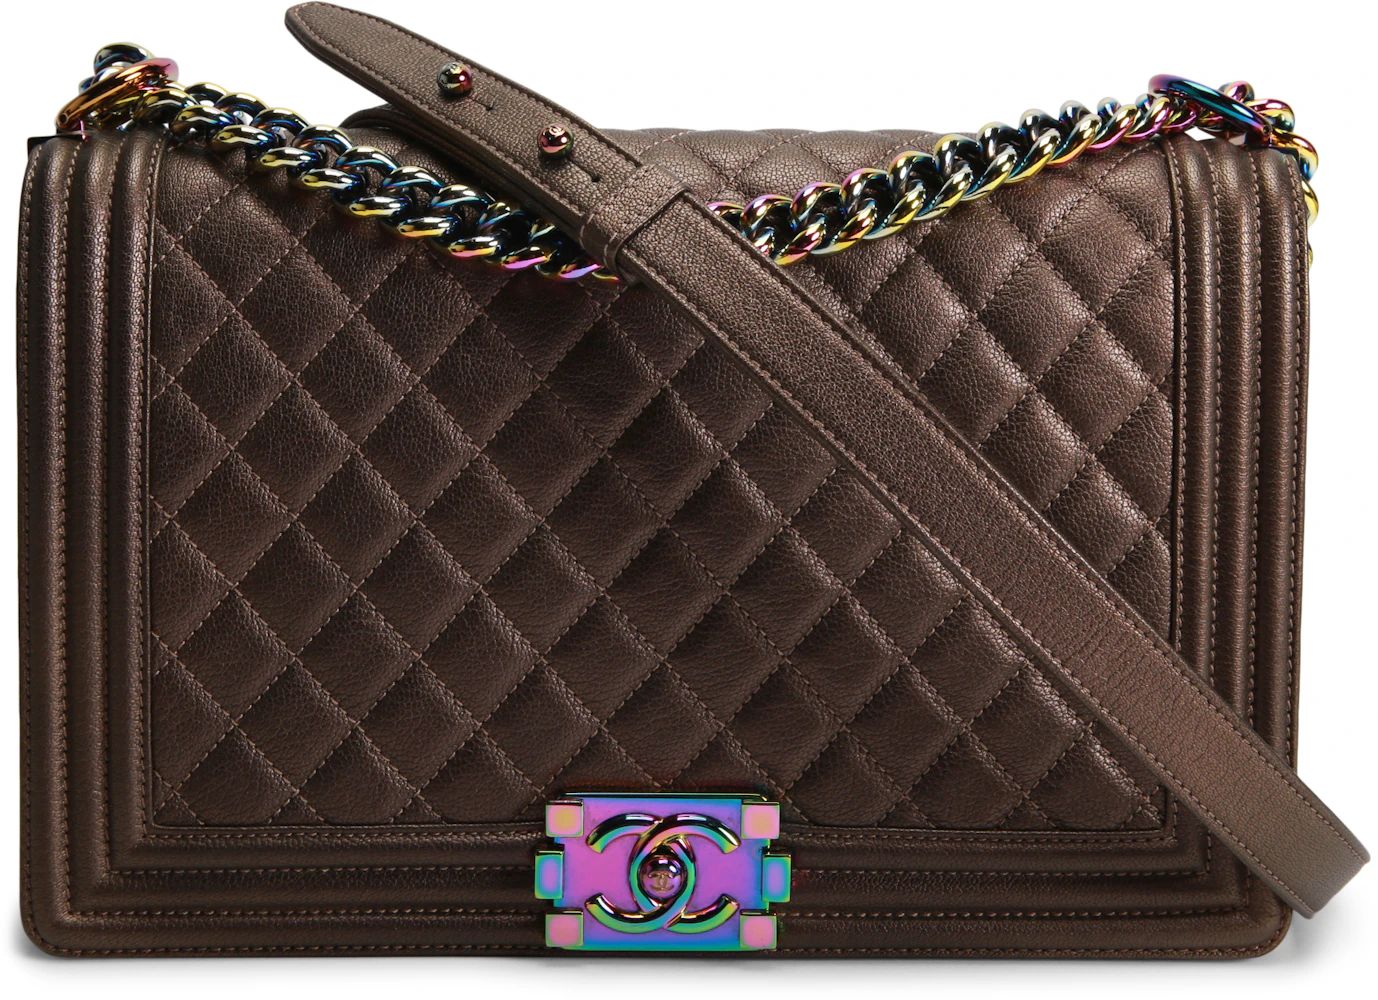 CHANEL Iridescent Satin Lambskin Quilted Medium Double Flap Bag Gold